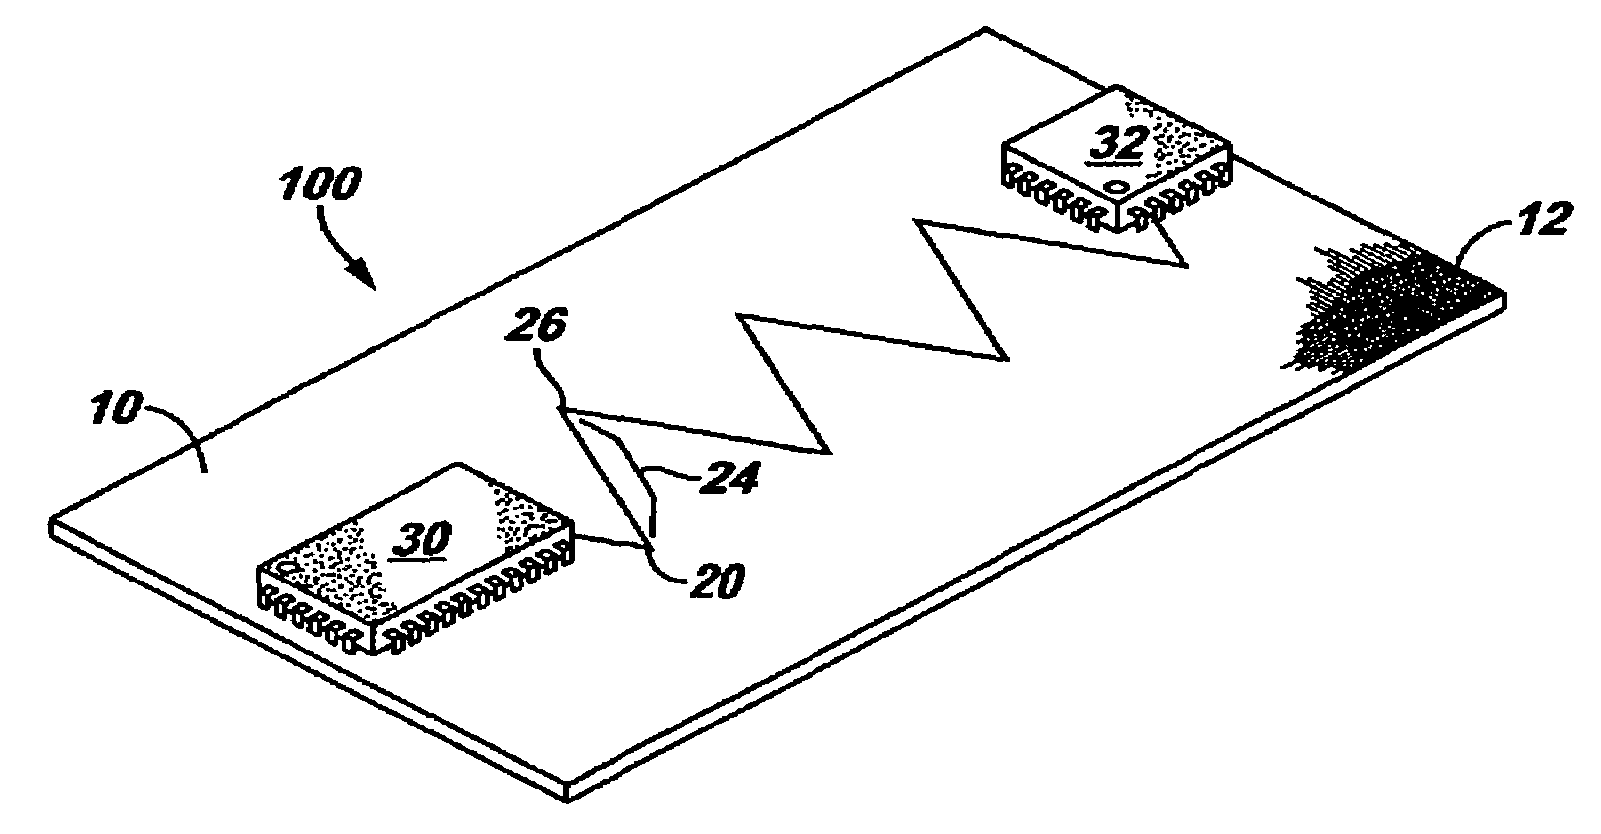 Printed circuit board trace routing method